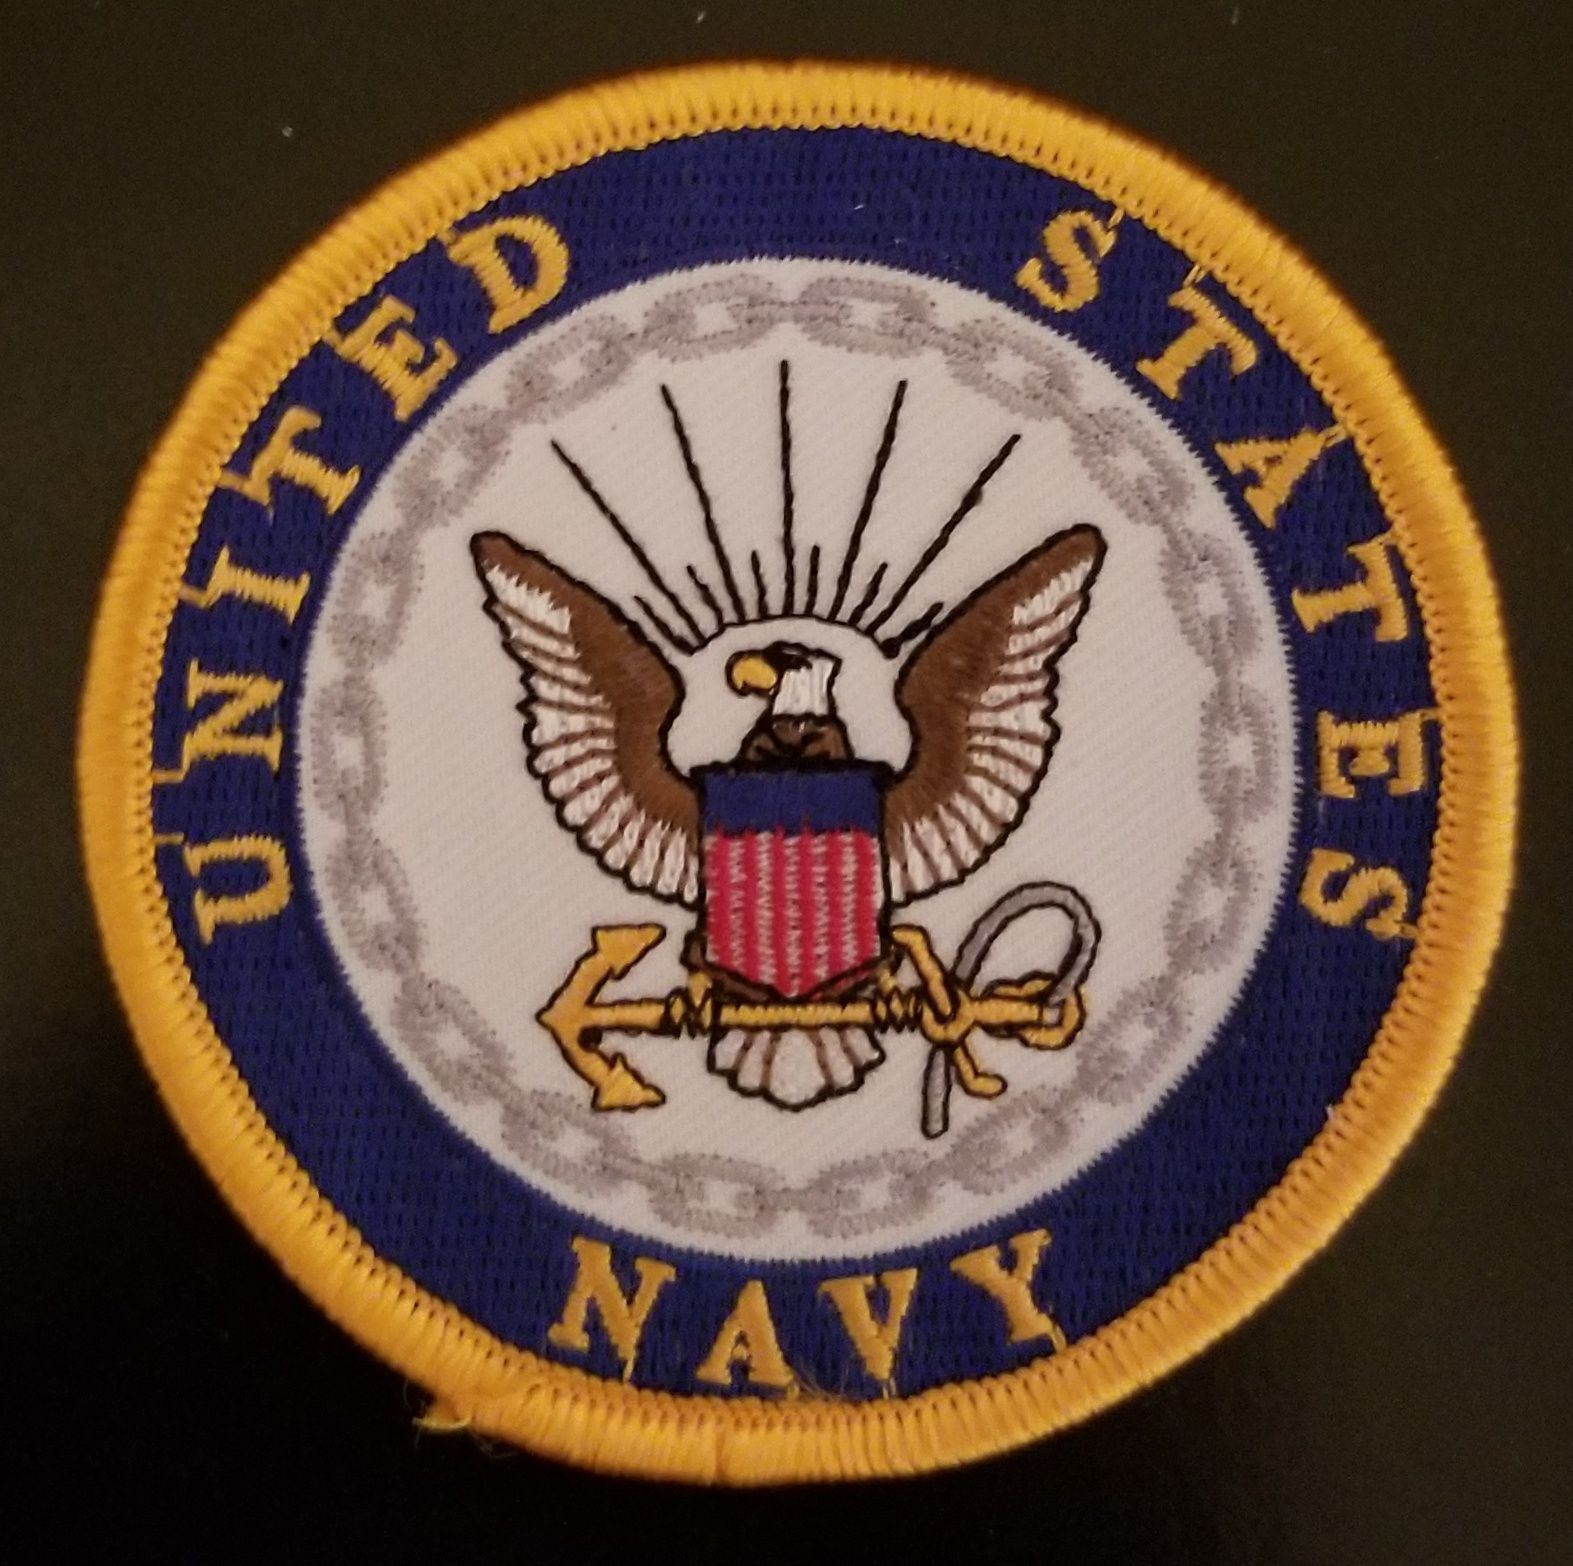 US NAVY 3 INCH ROUND PATCH - NEW DESIGN - MADE IN THE USA